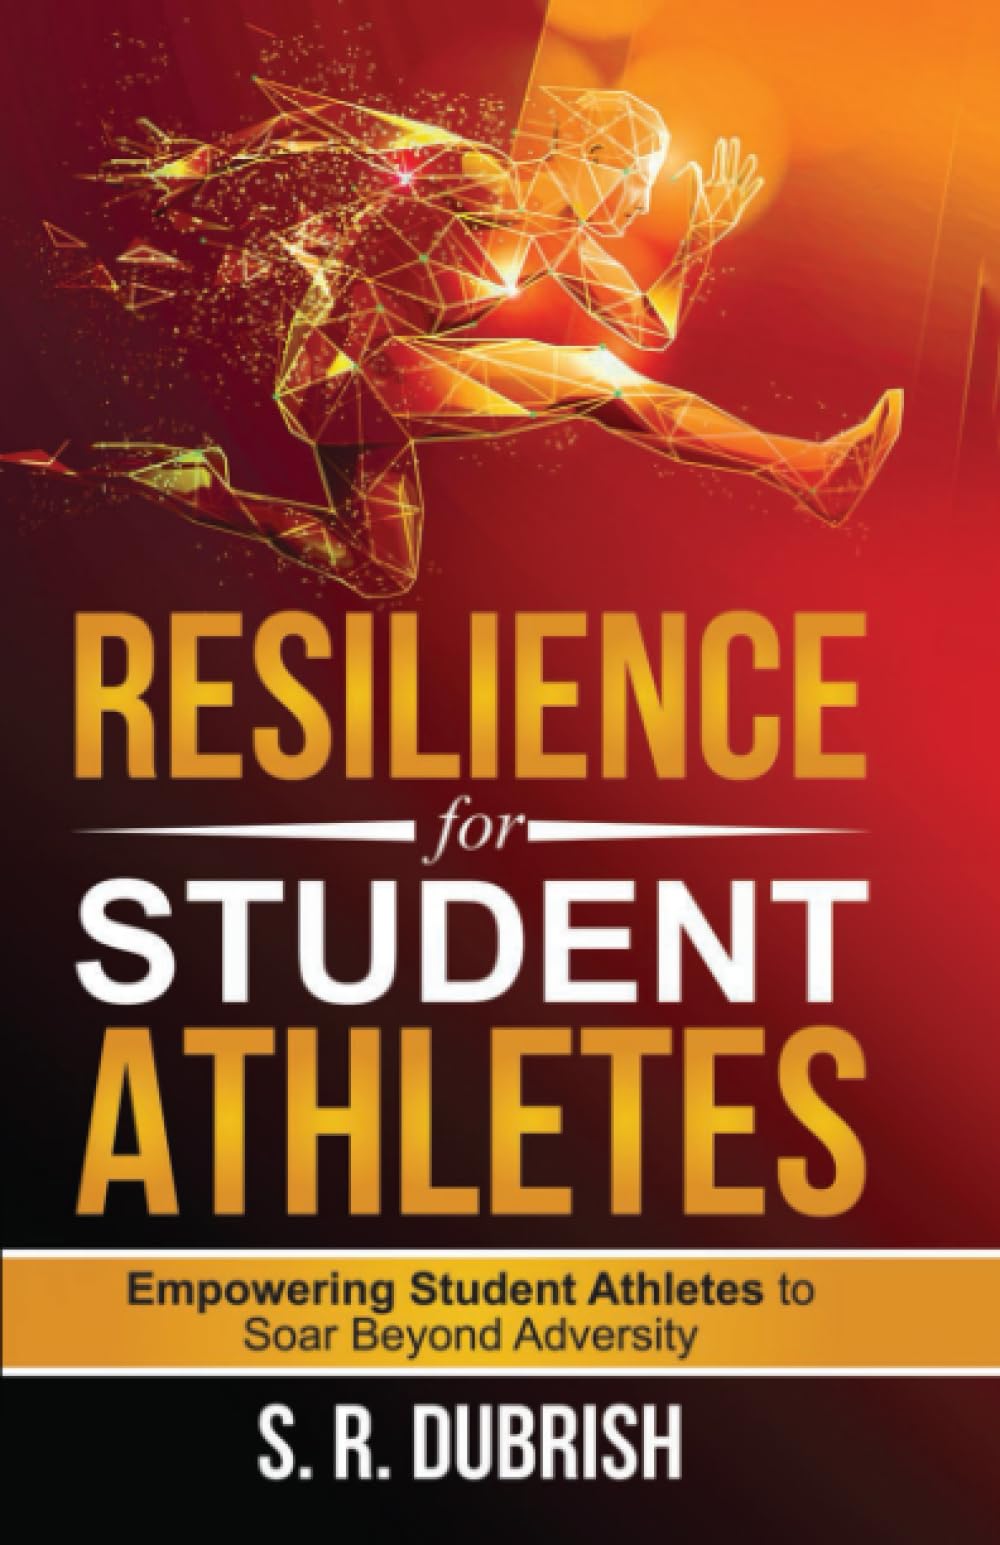 Resilience for Student Athletes: Empowering Student Athletes to Soar Beyond Adversity